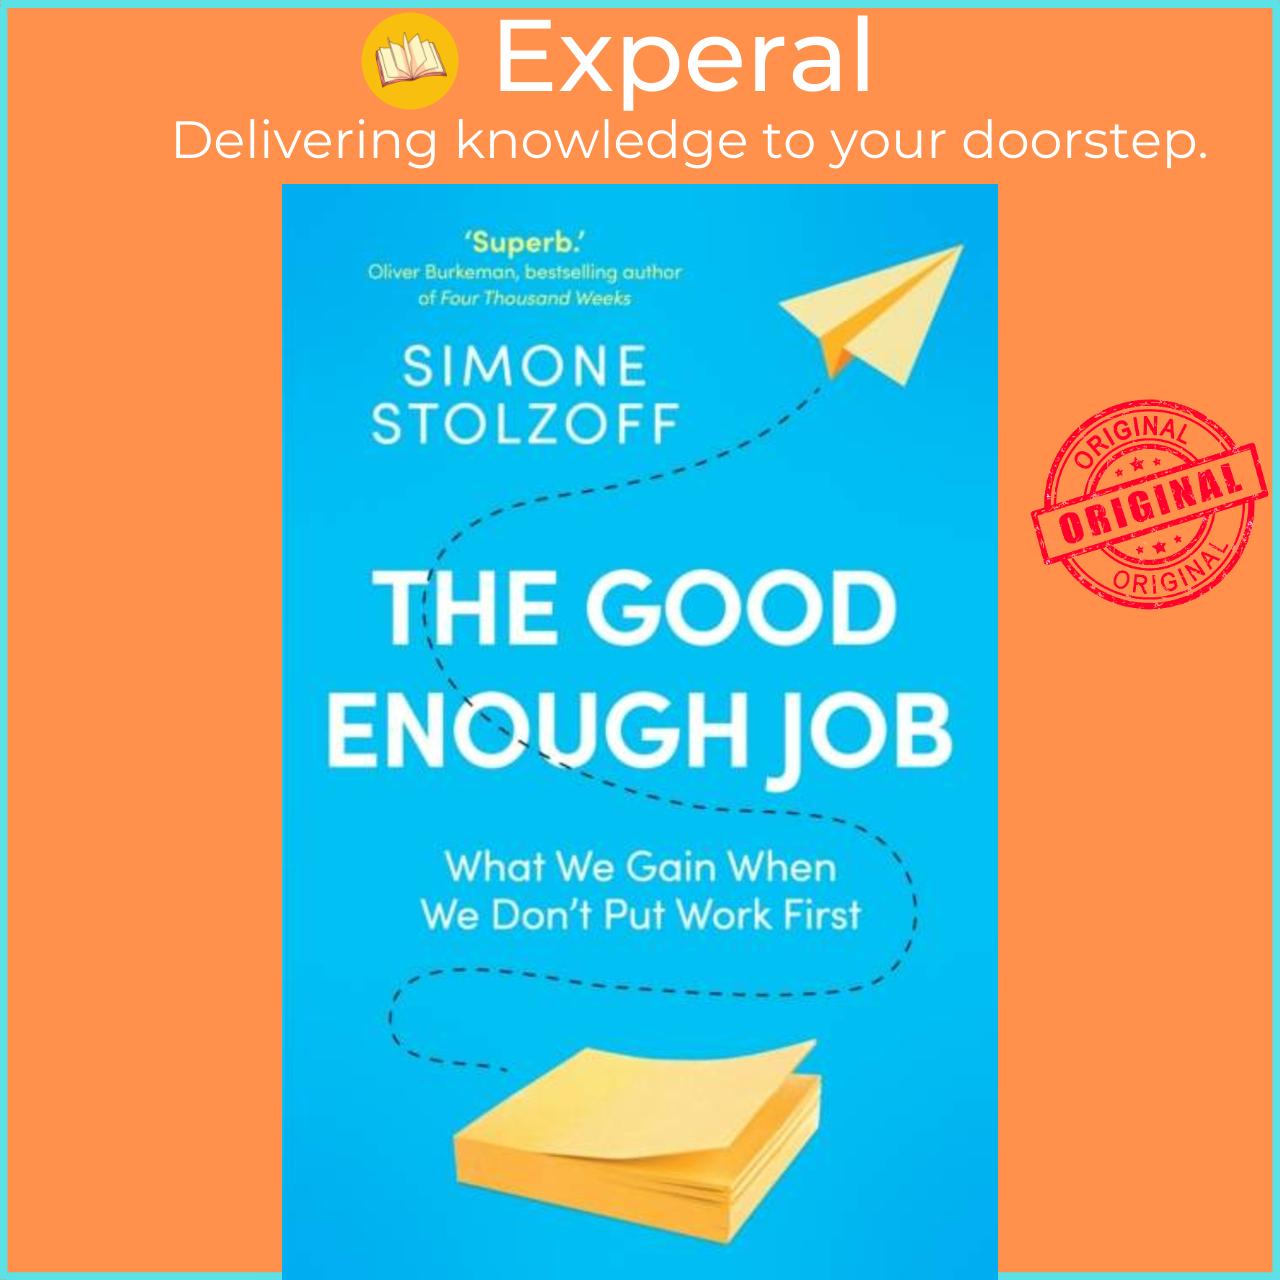 Sách - The Good Enough Job - What We Gain When We Don't Put Work First by Simone Stolzoff (UK edition, paperback)